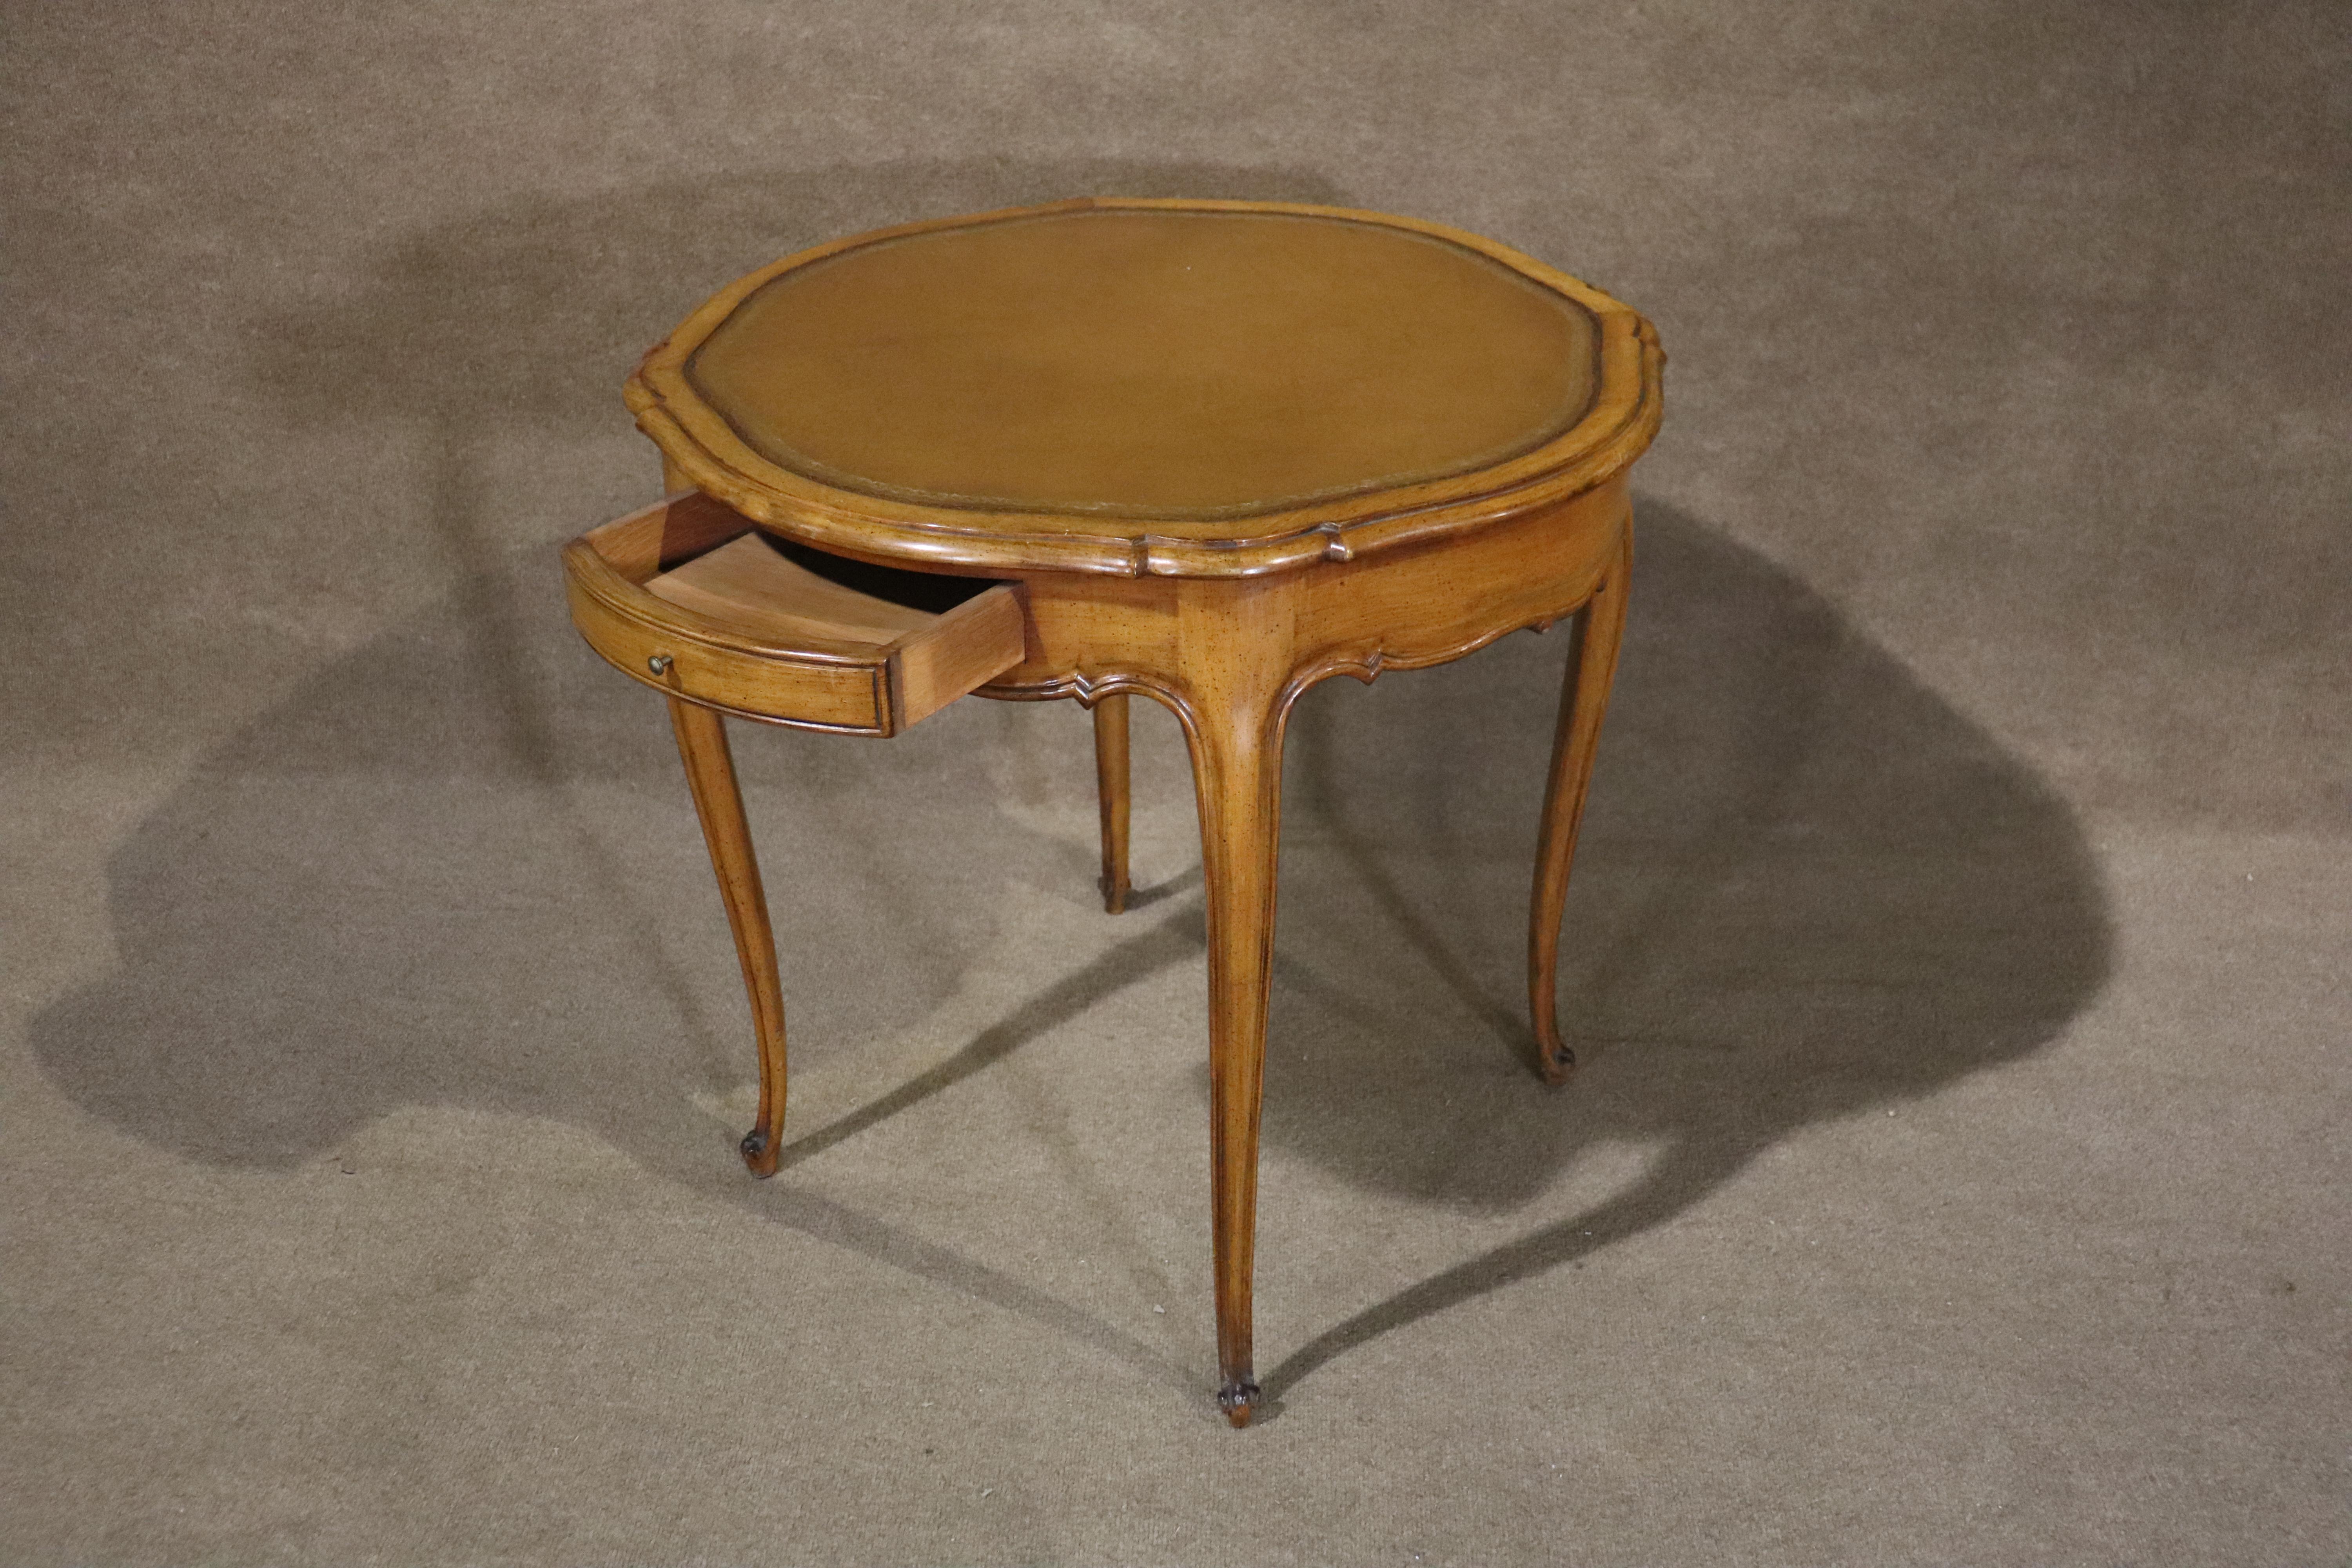 This French style table has a leather top with sculpted legs and drawer.
Please confirm location NY or NJ